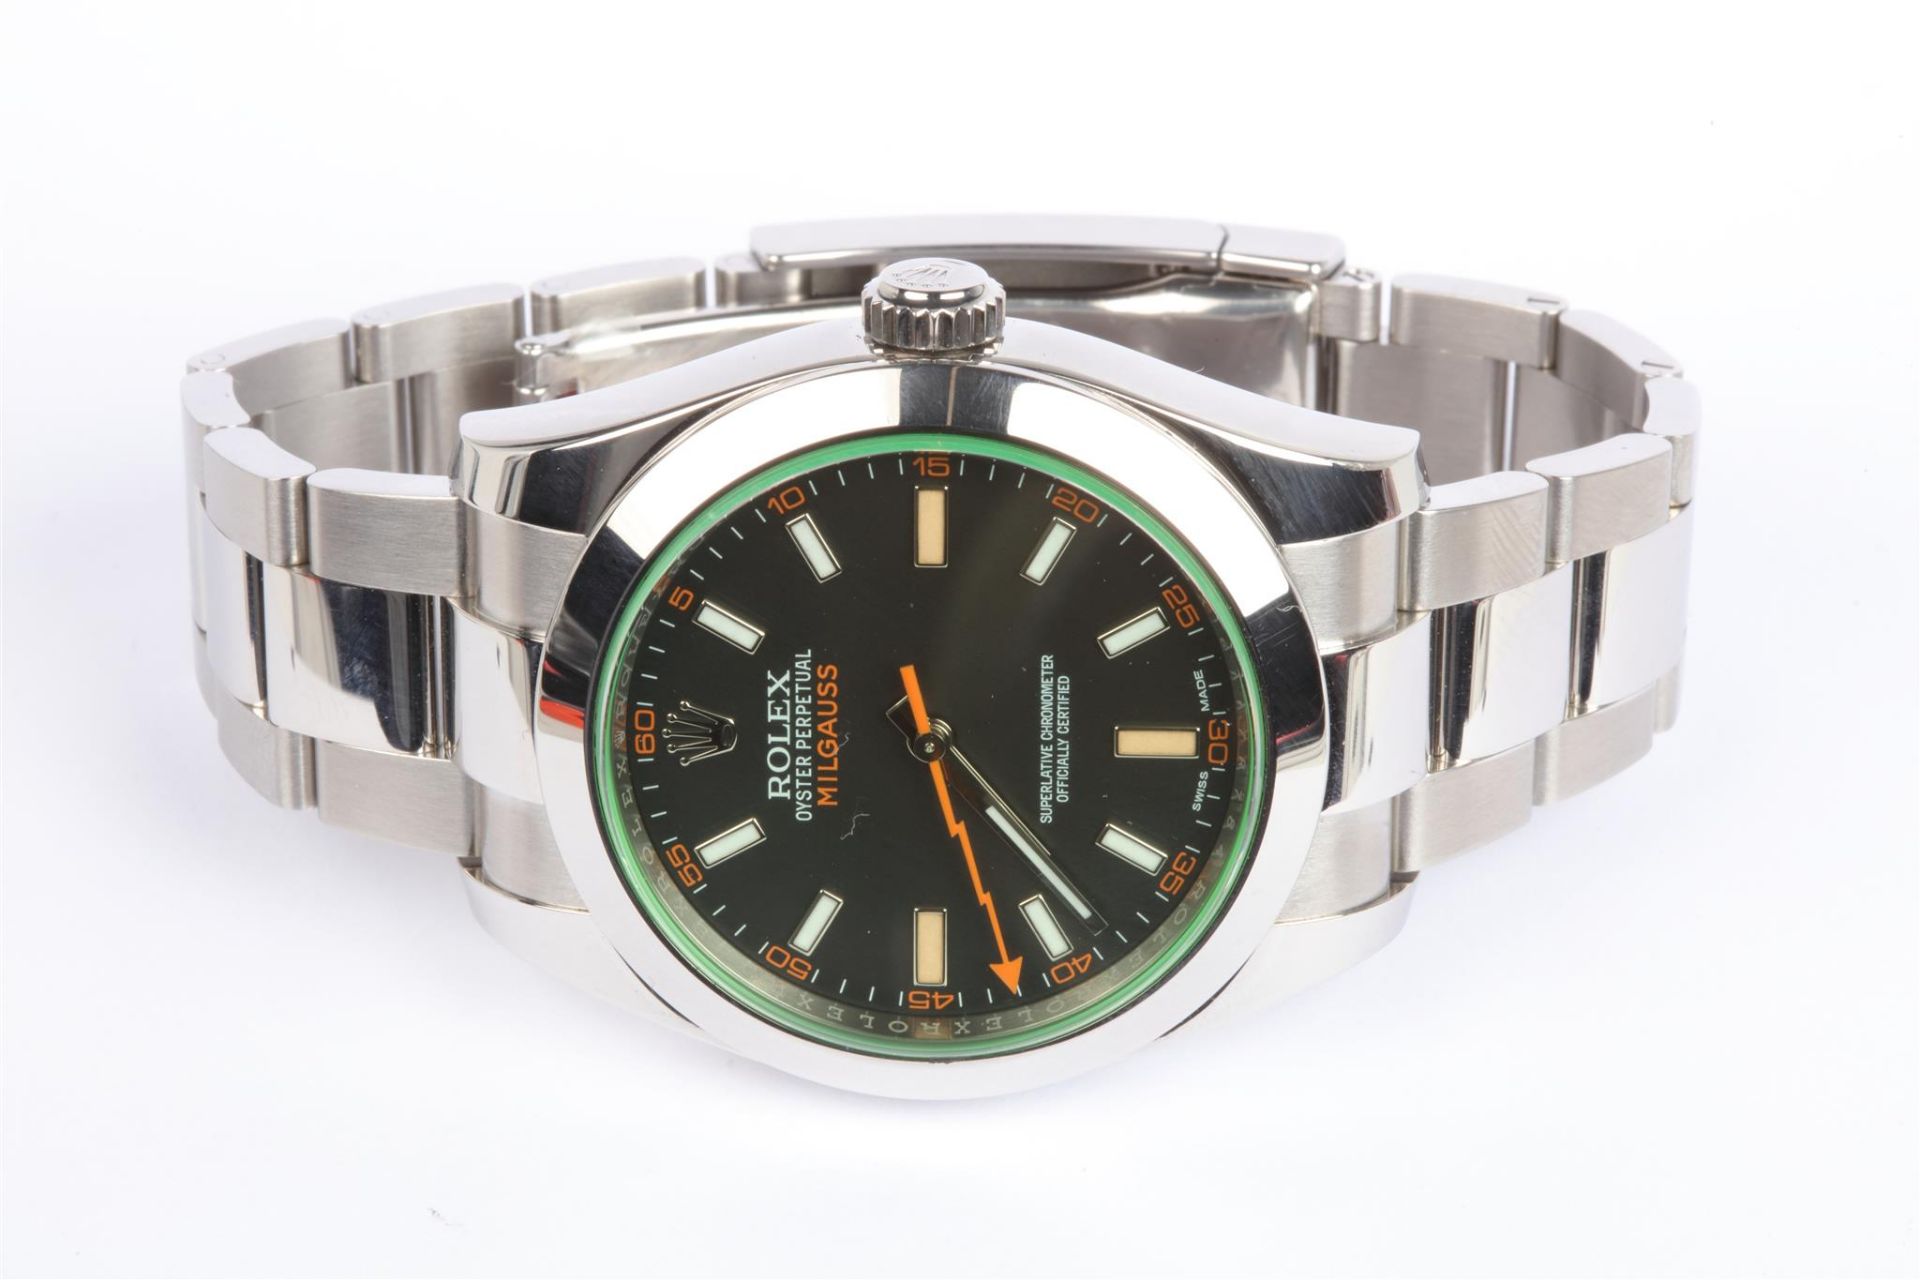 No VAT Gents 2017 Rolex Oyster Perpetual Milgauss Watch - Model 116400GV - Stainless Steel Strap - - Image 2 of 4